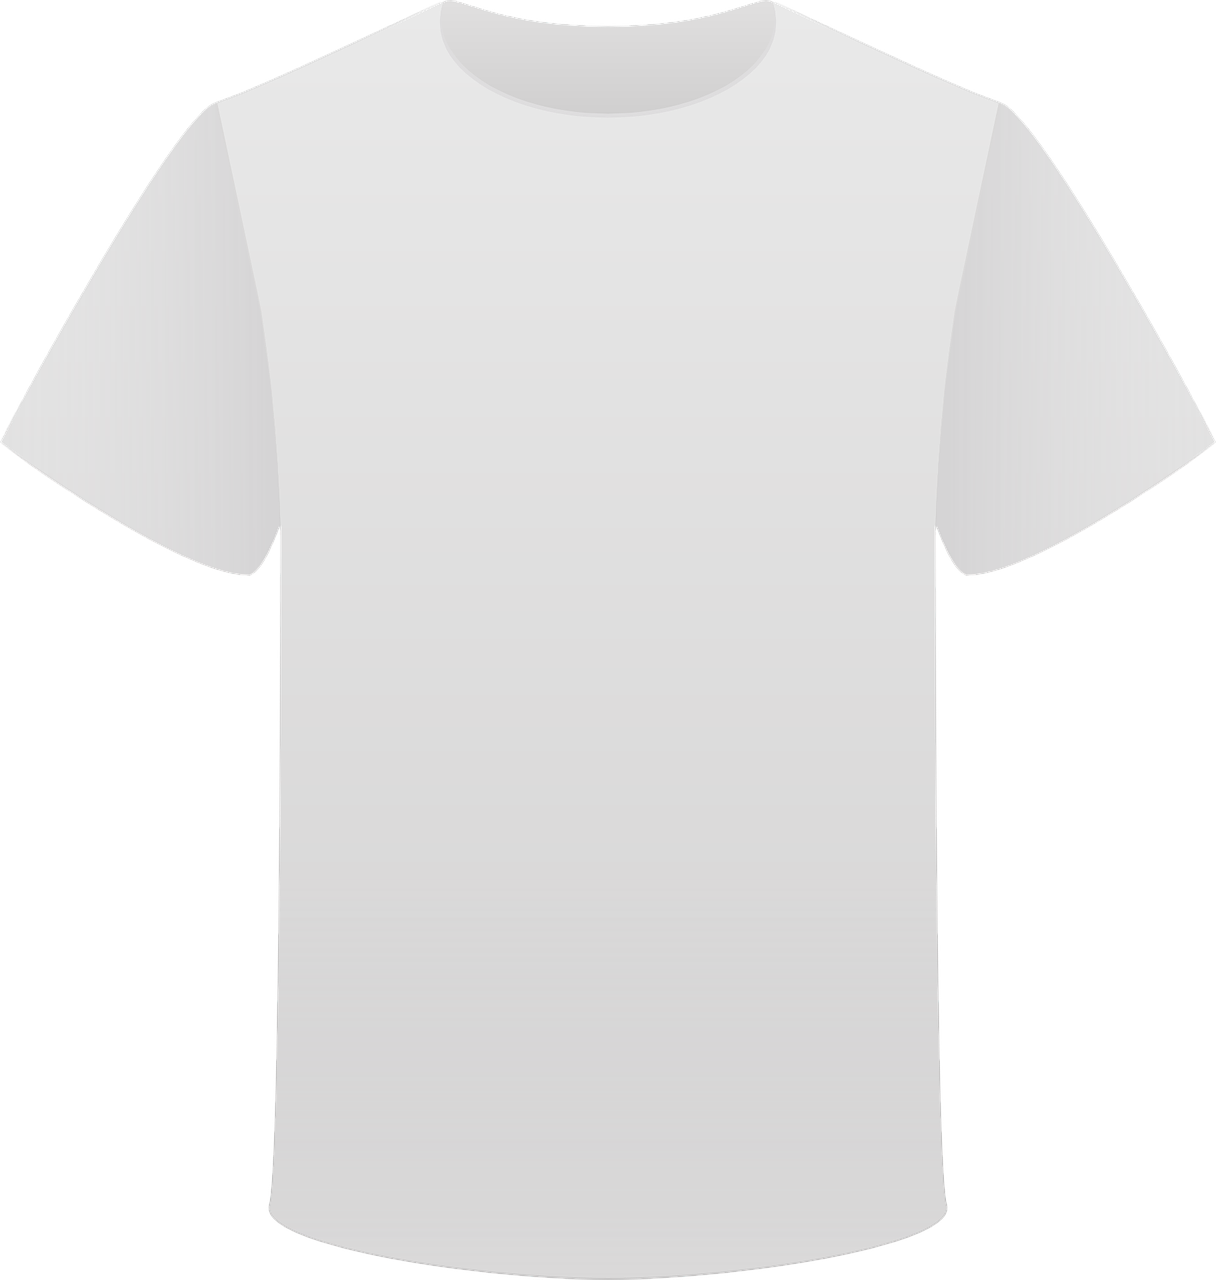 Download Shirt, Polo, Dress. Royalty-Free Vector Graphic - Pixabay